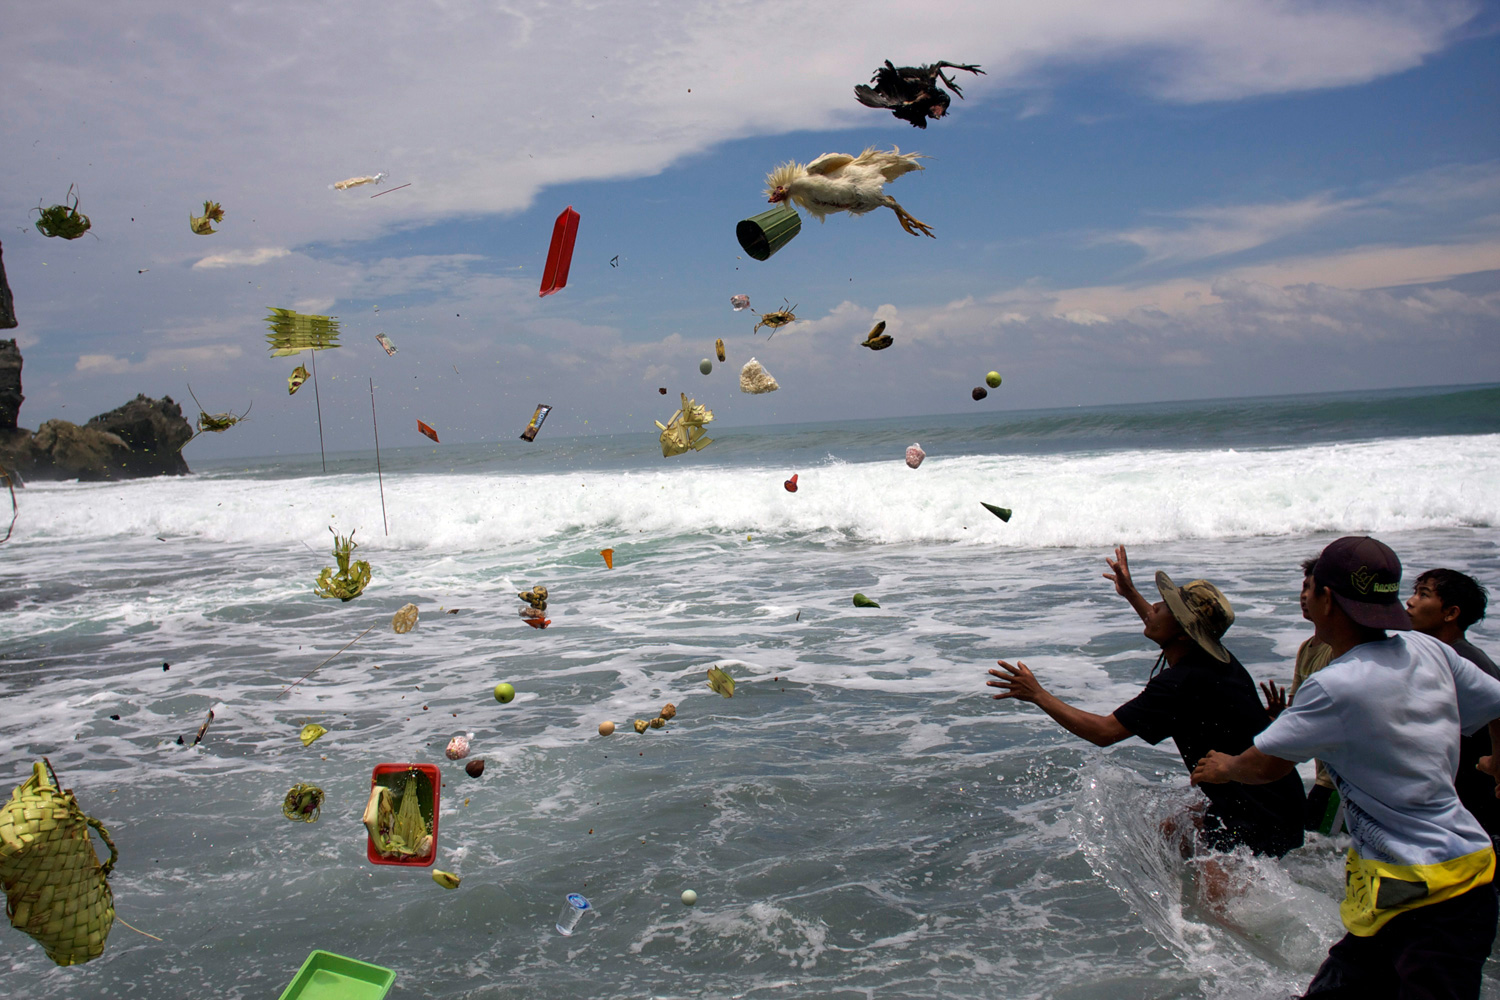 March 7, 2012. Indonesian men try to catch offerings thrown into the sea by Hindu worshippers during the ritual of Melasti on a beach in Gunung Kidul, Yogyakarta, Indonesia.